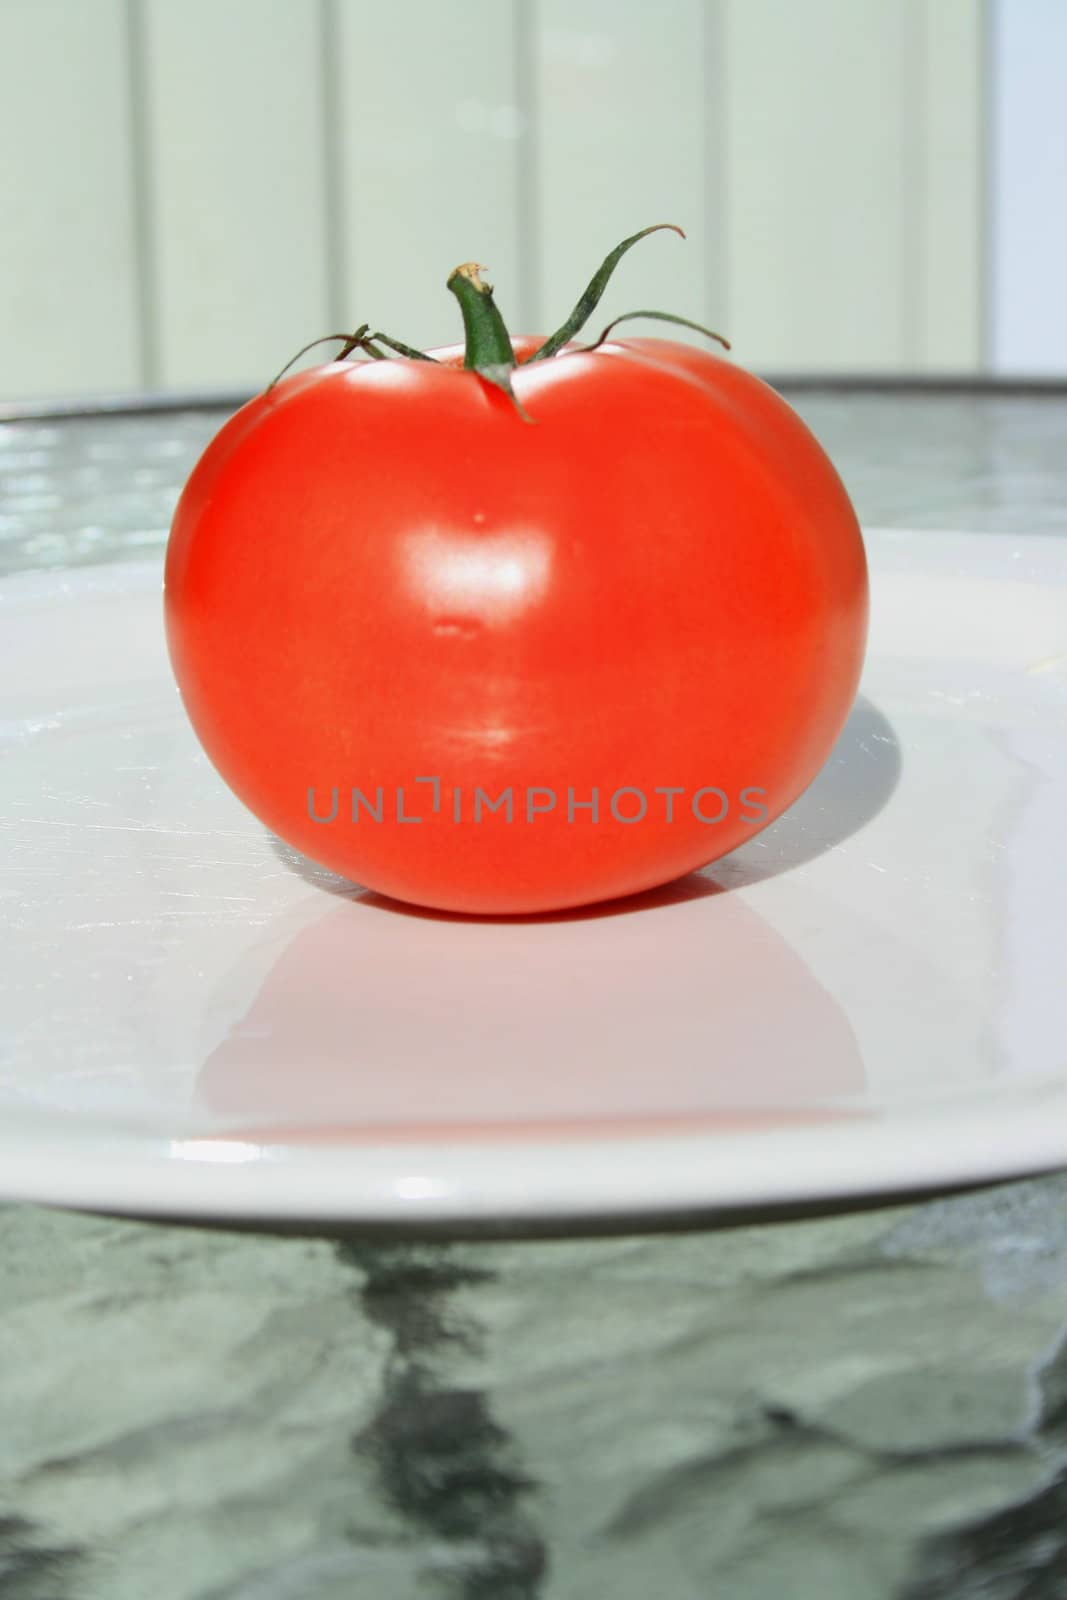 Close up of a red tomato on a plate.
